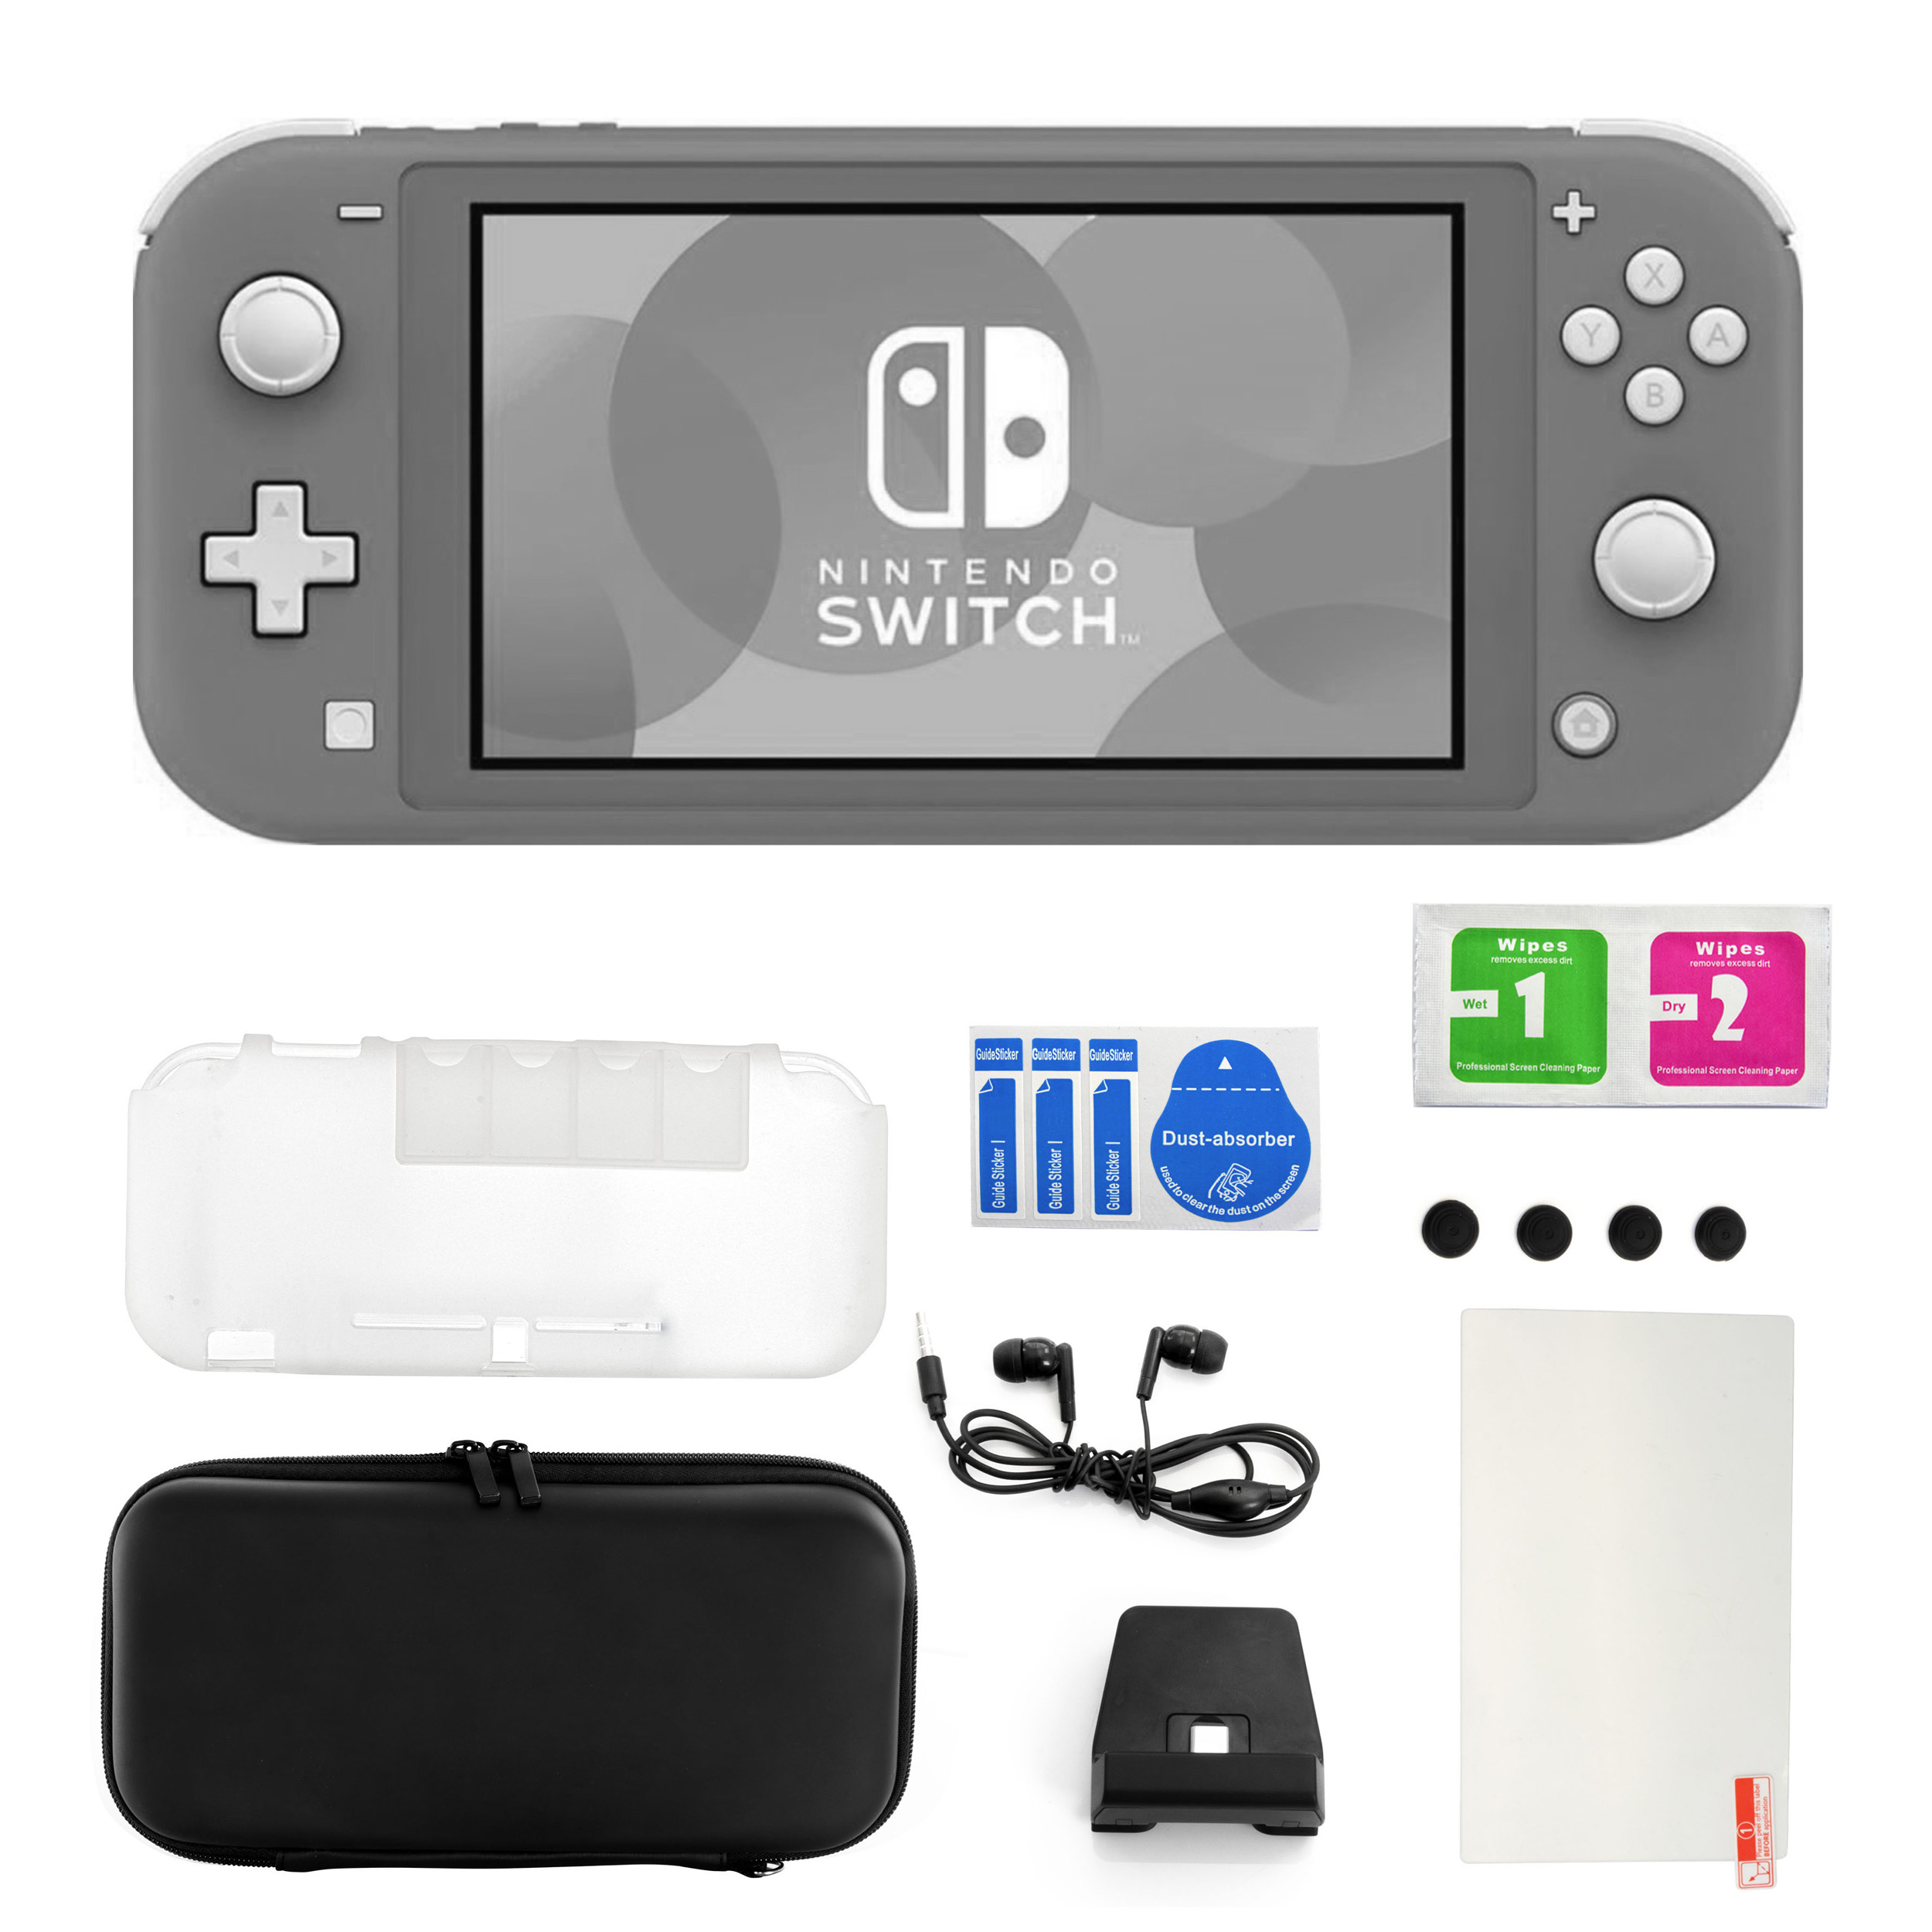 Nintendo Switch Lite in Gray with Accessories 11 in 1 Accessories Kit - image 1 of 1